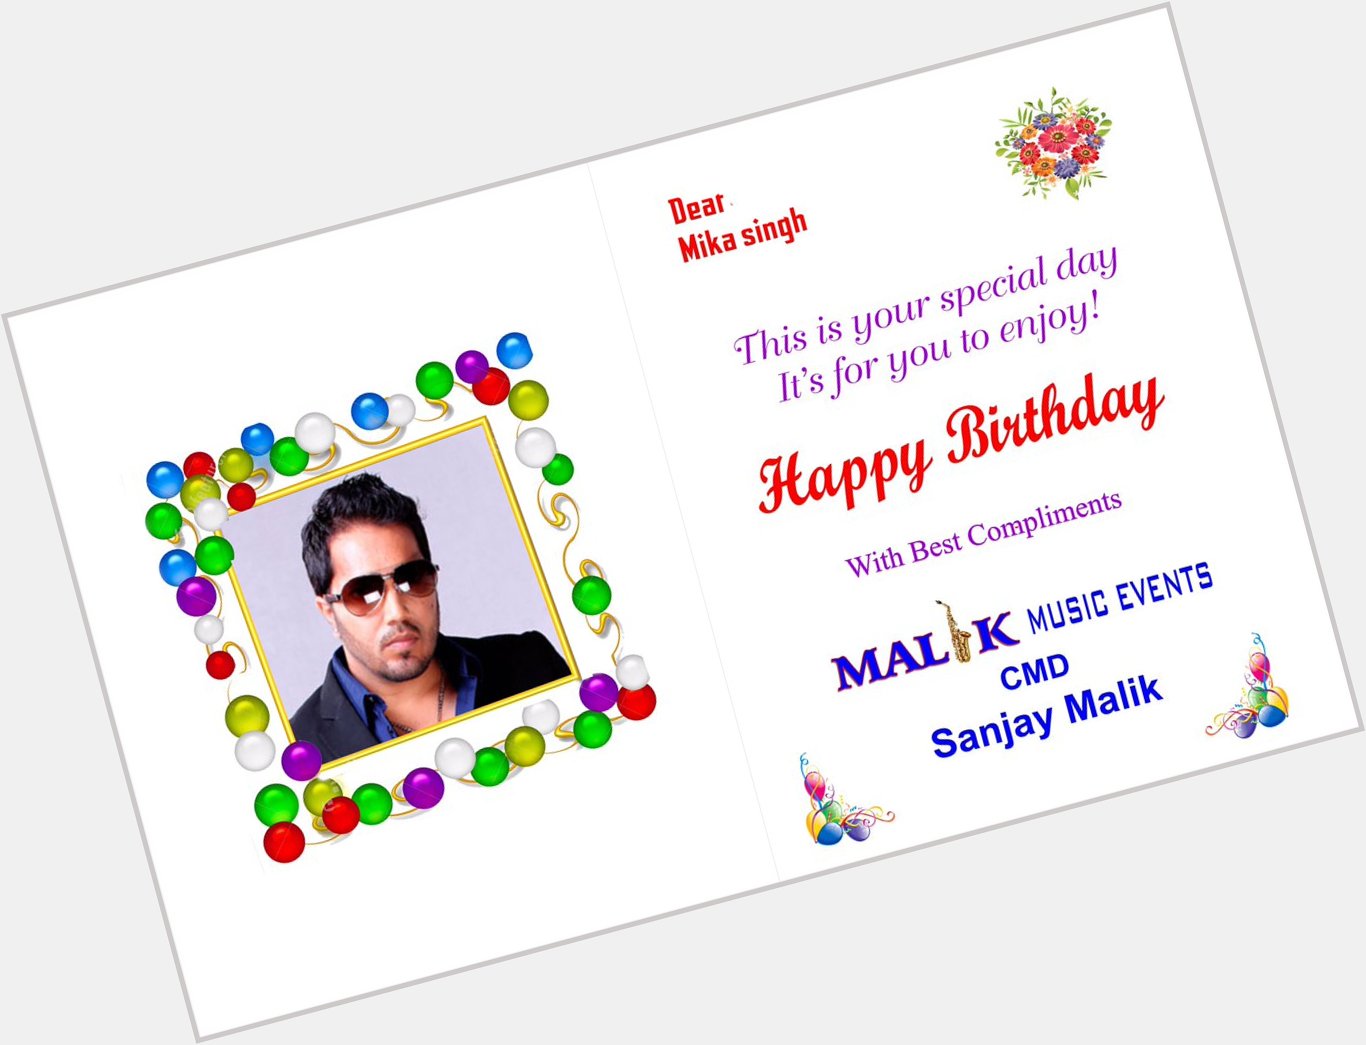 King of voice my younger brother Bollywood Playback singer Happy Birthday king mika singh mata rani bless you 